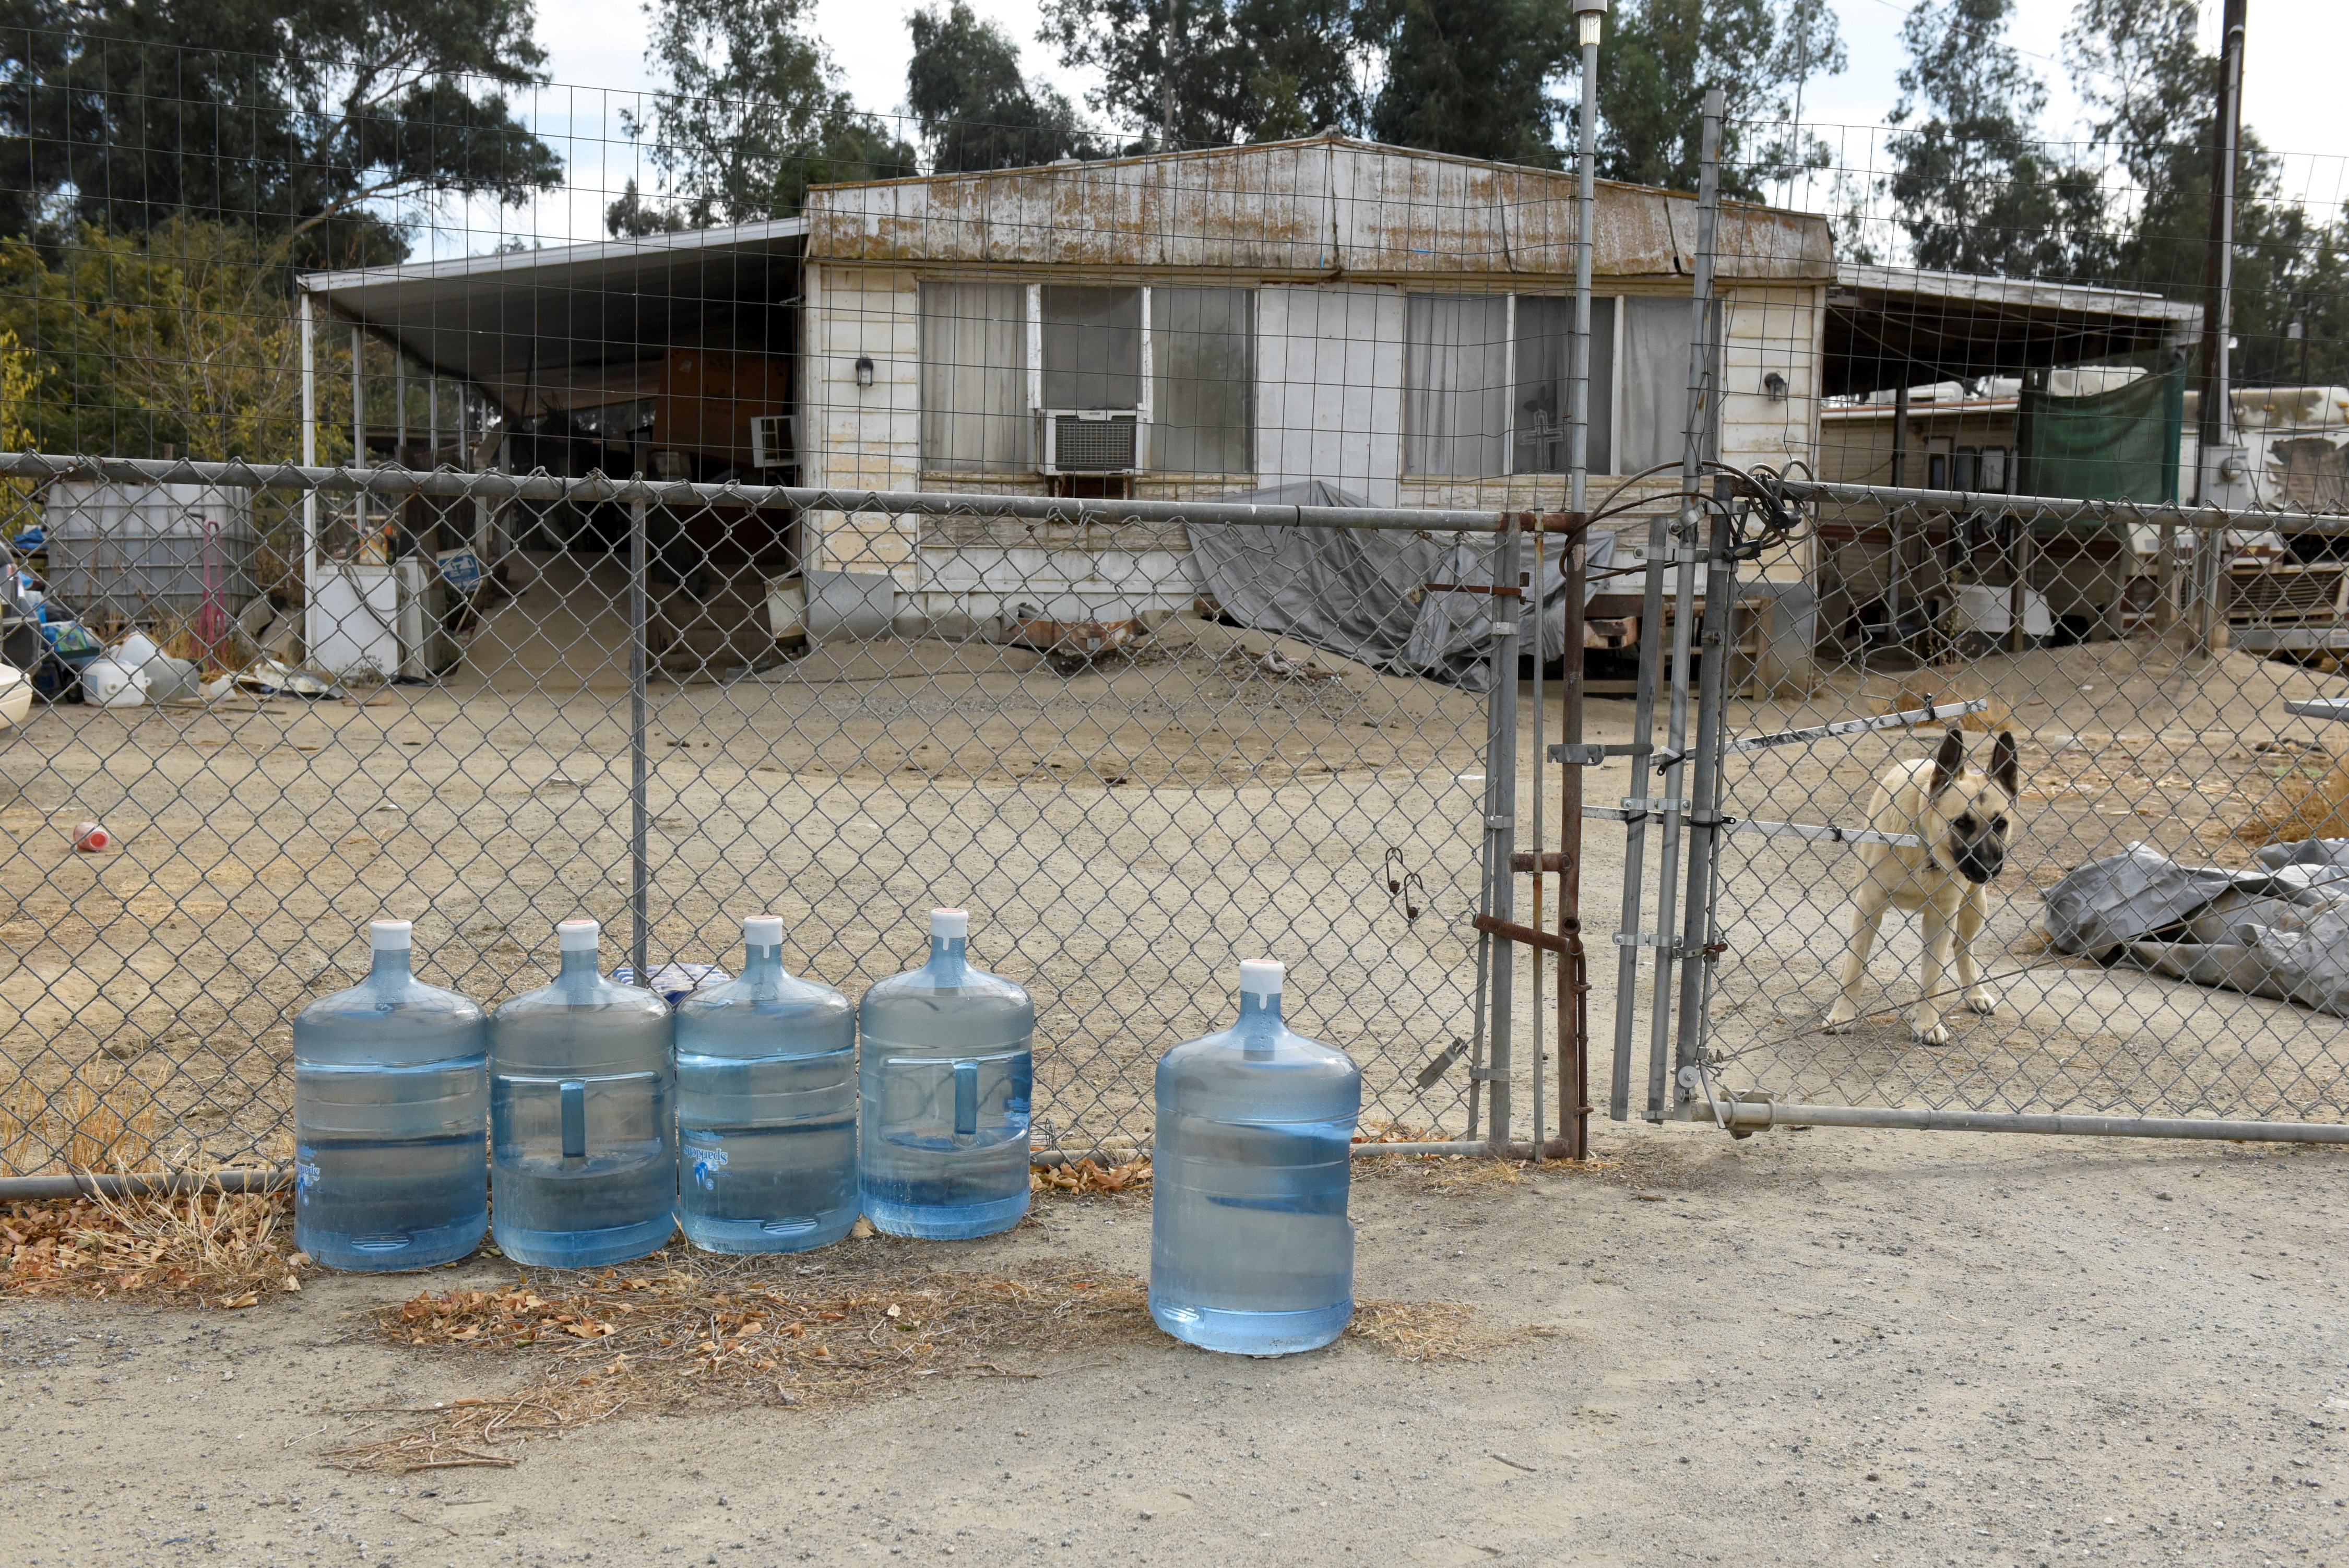 Water bottles filled with drinking water sit outside of a home in Teviston, California, U.S., October 20, 2021. Because the drinking water in Teviston is contaminated, the community provides an allotment of fresh drinking water to the residents. Picture taken on October 20, 2021. REUTERS/Stephanie Keith